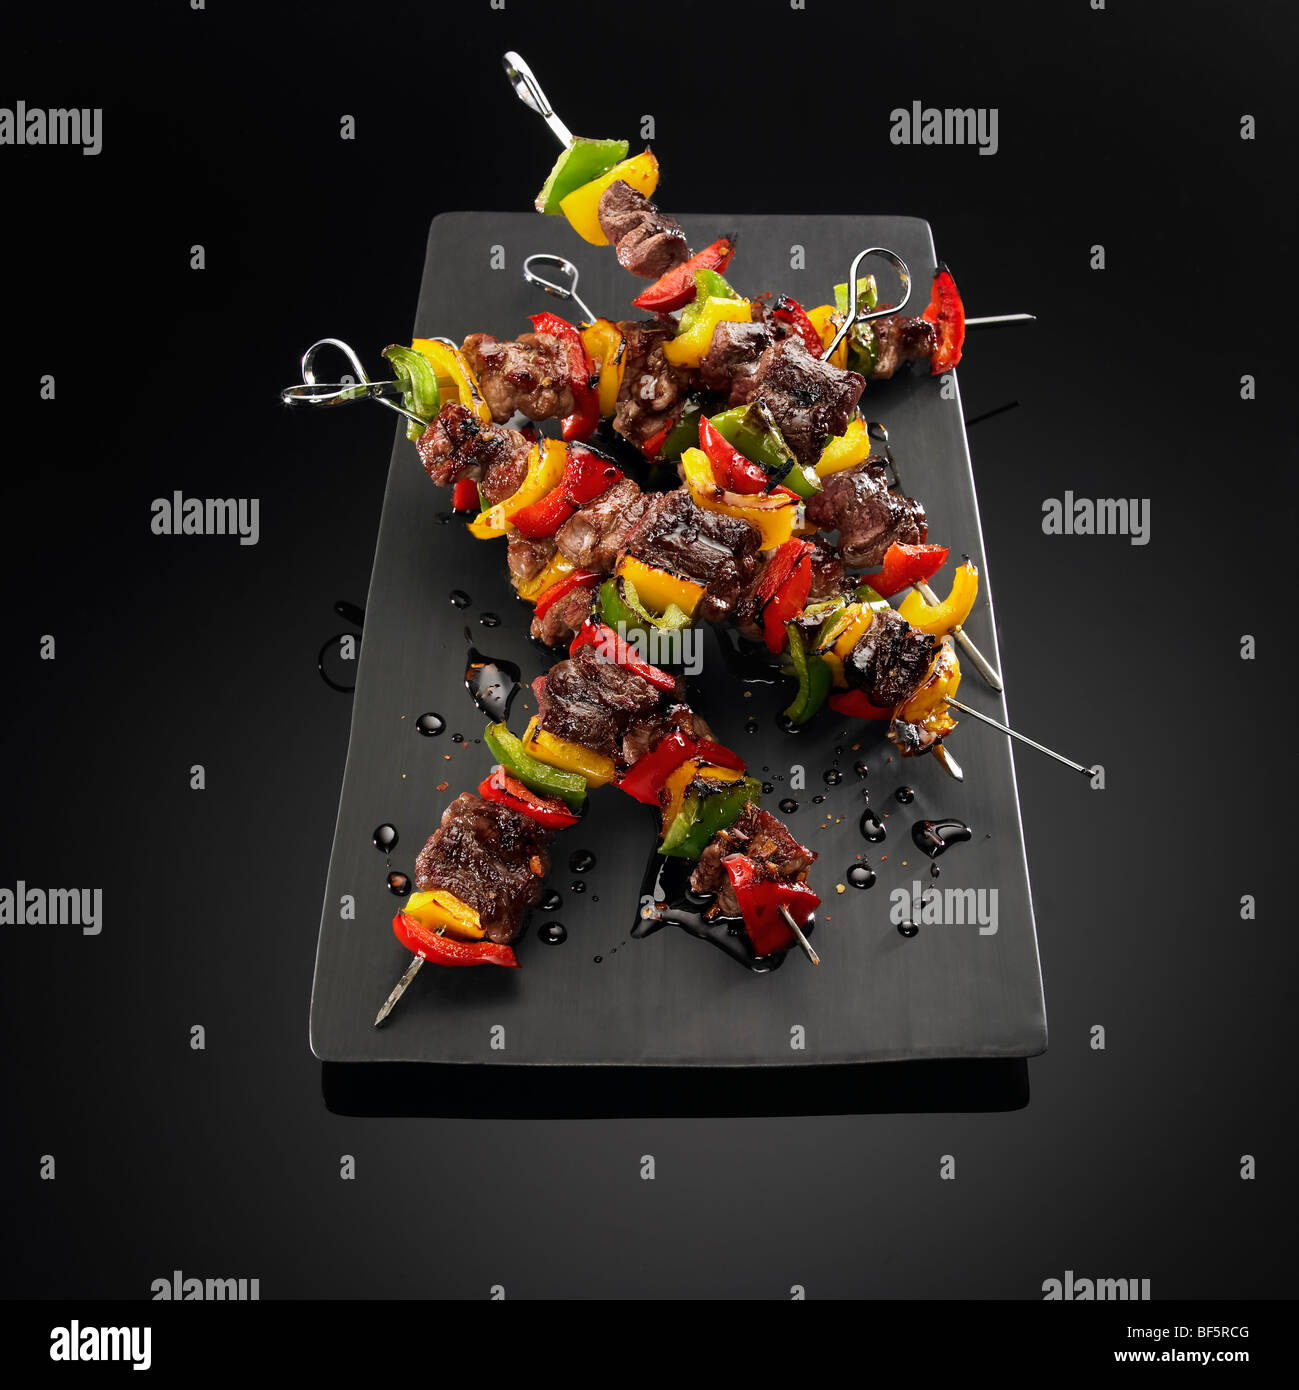 Beef and vegetable kebabs on skewers, on a black background. Stock Photo